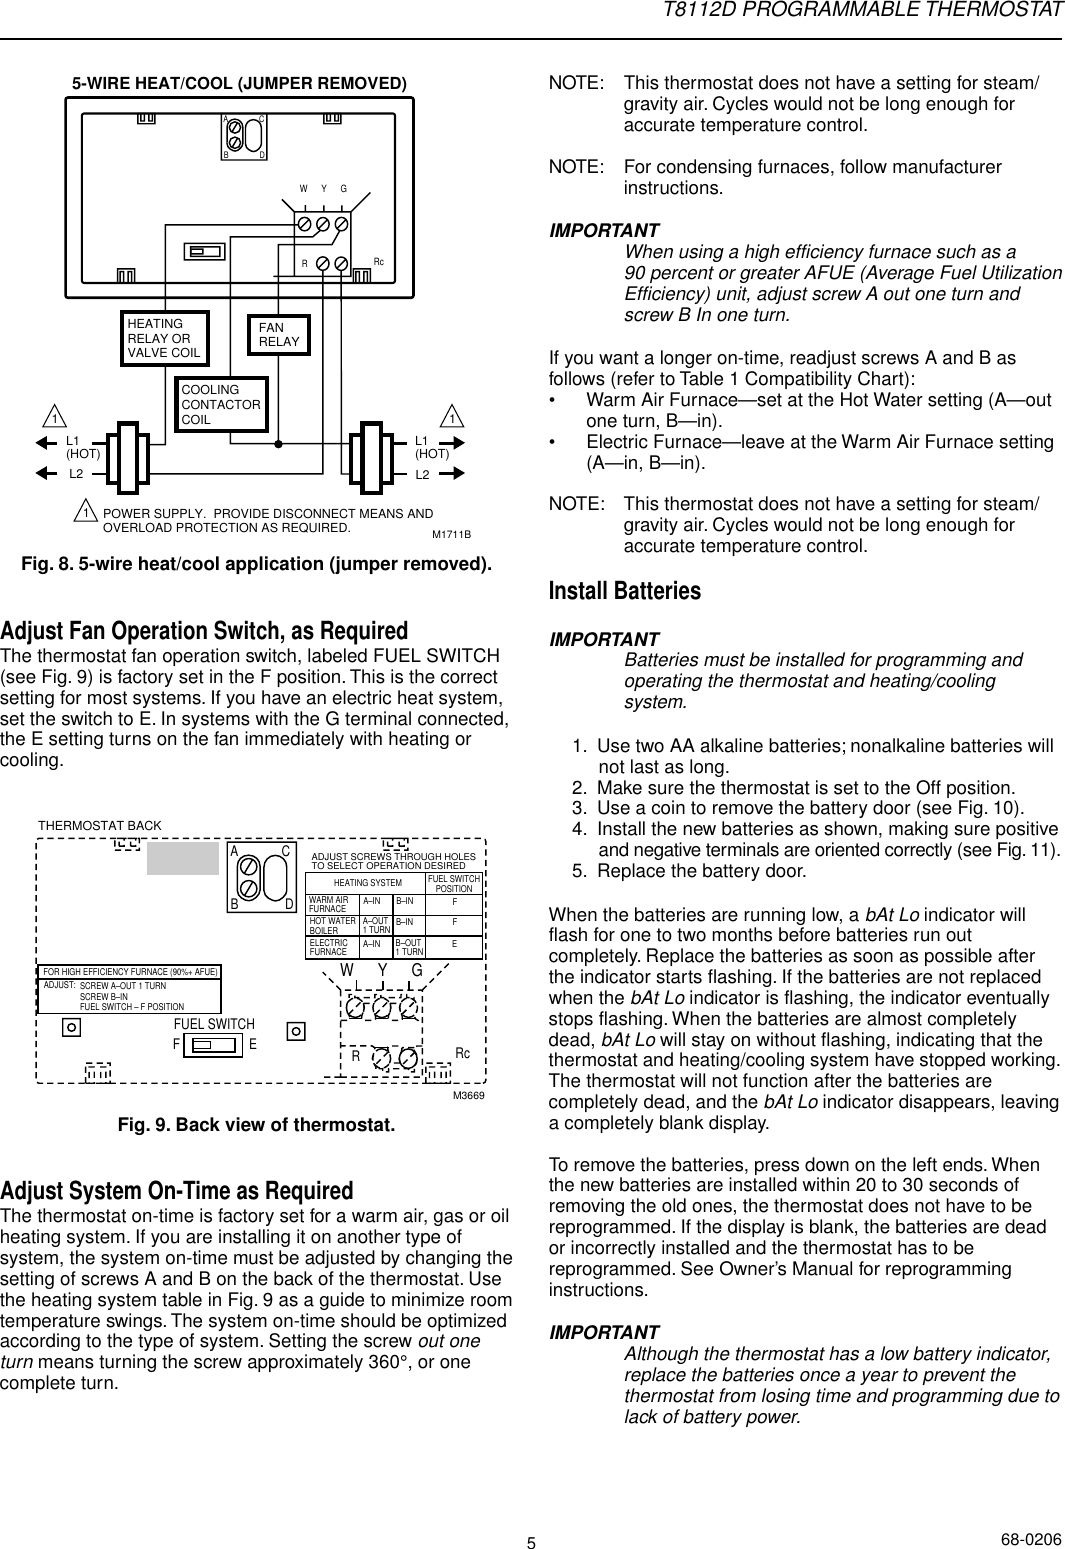 Page 5 of 8 - Honeywell Honeywell-Honeywell-Thermostat-T8112D-Users-Manual- 68-0170 - T8112 Programmable Thermostat  Honeywell-honeywell-thermostat-t8112d-users-manual